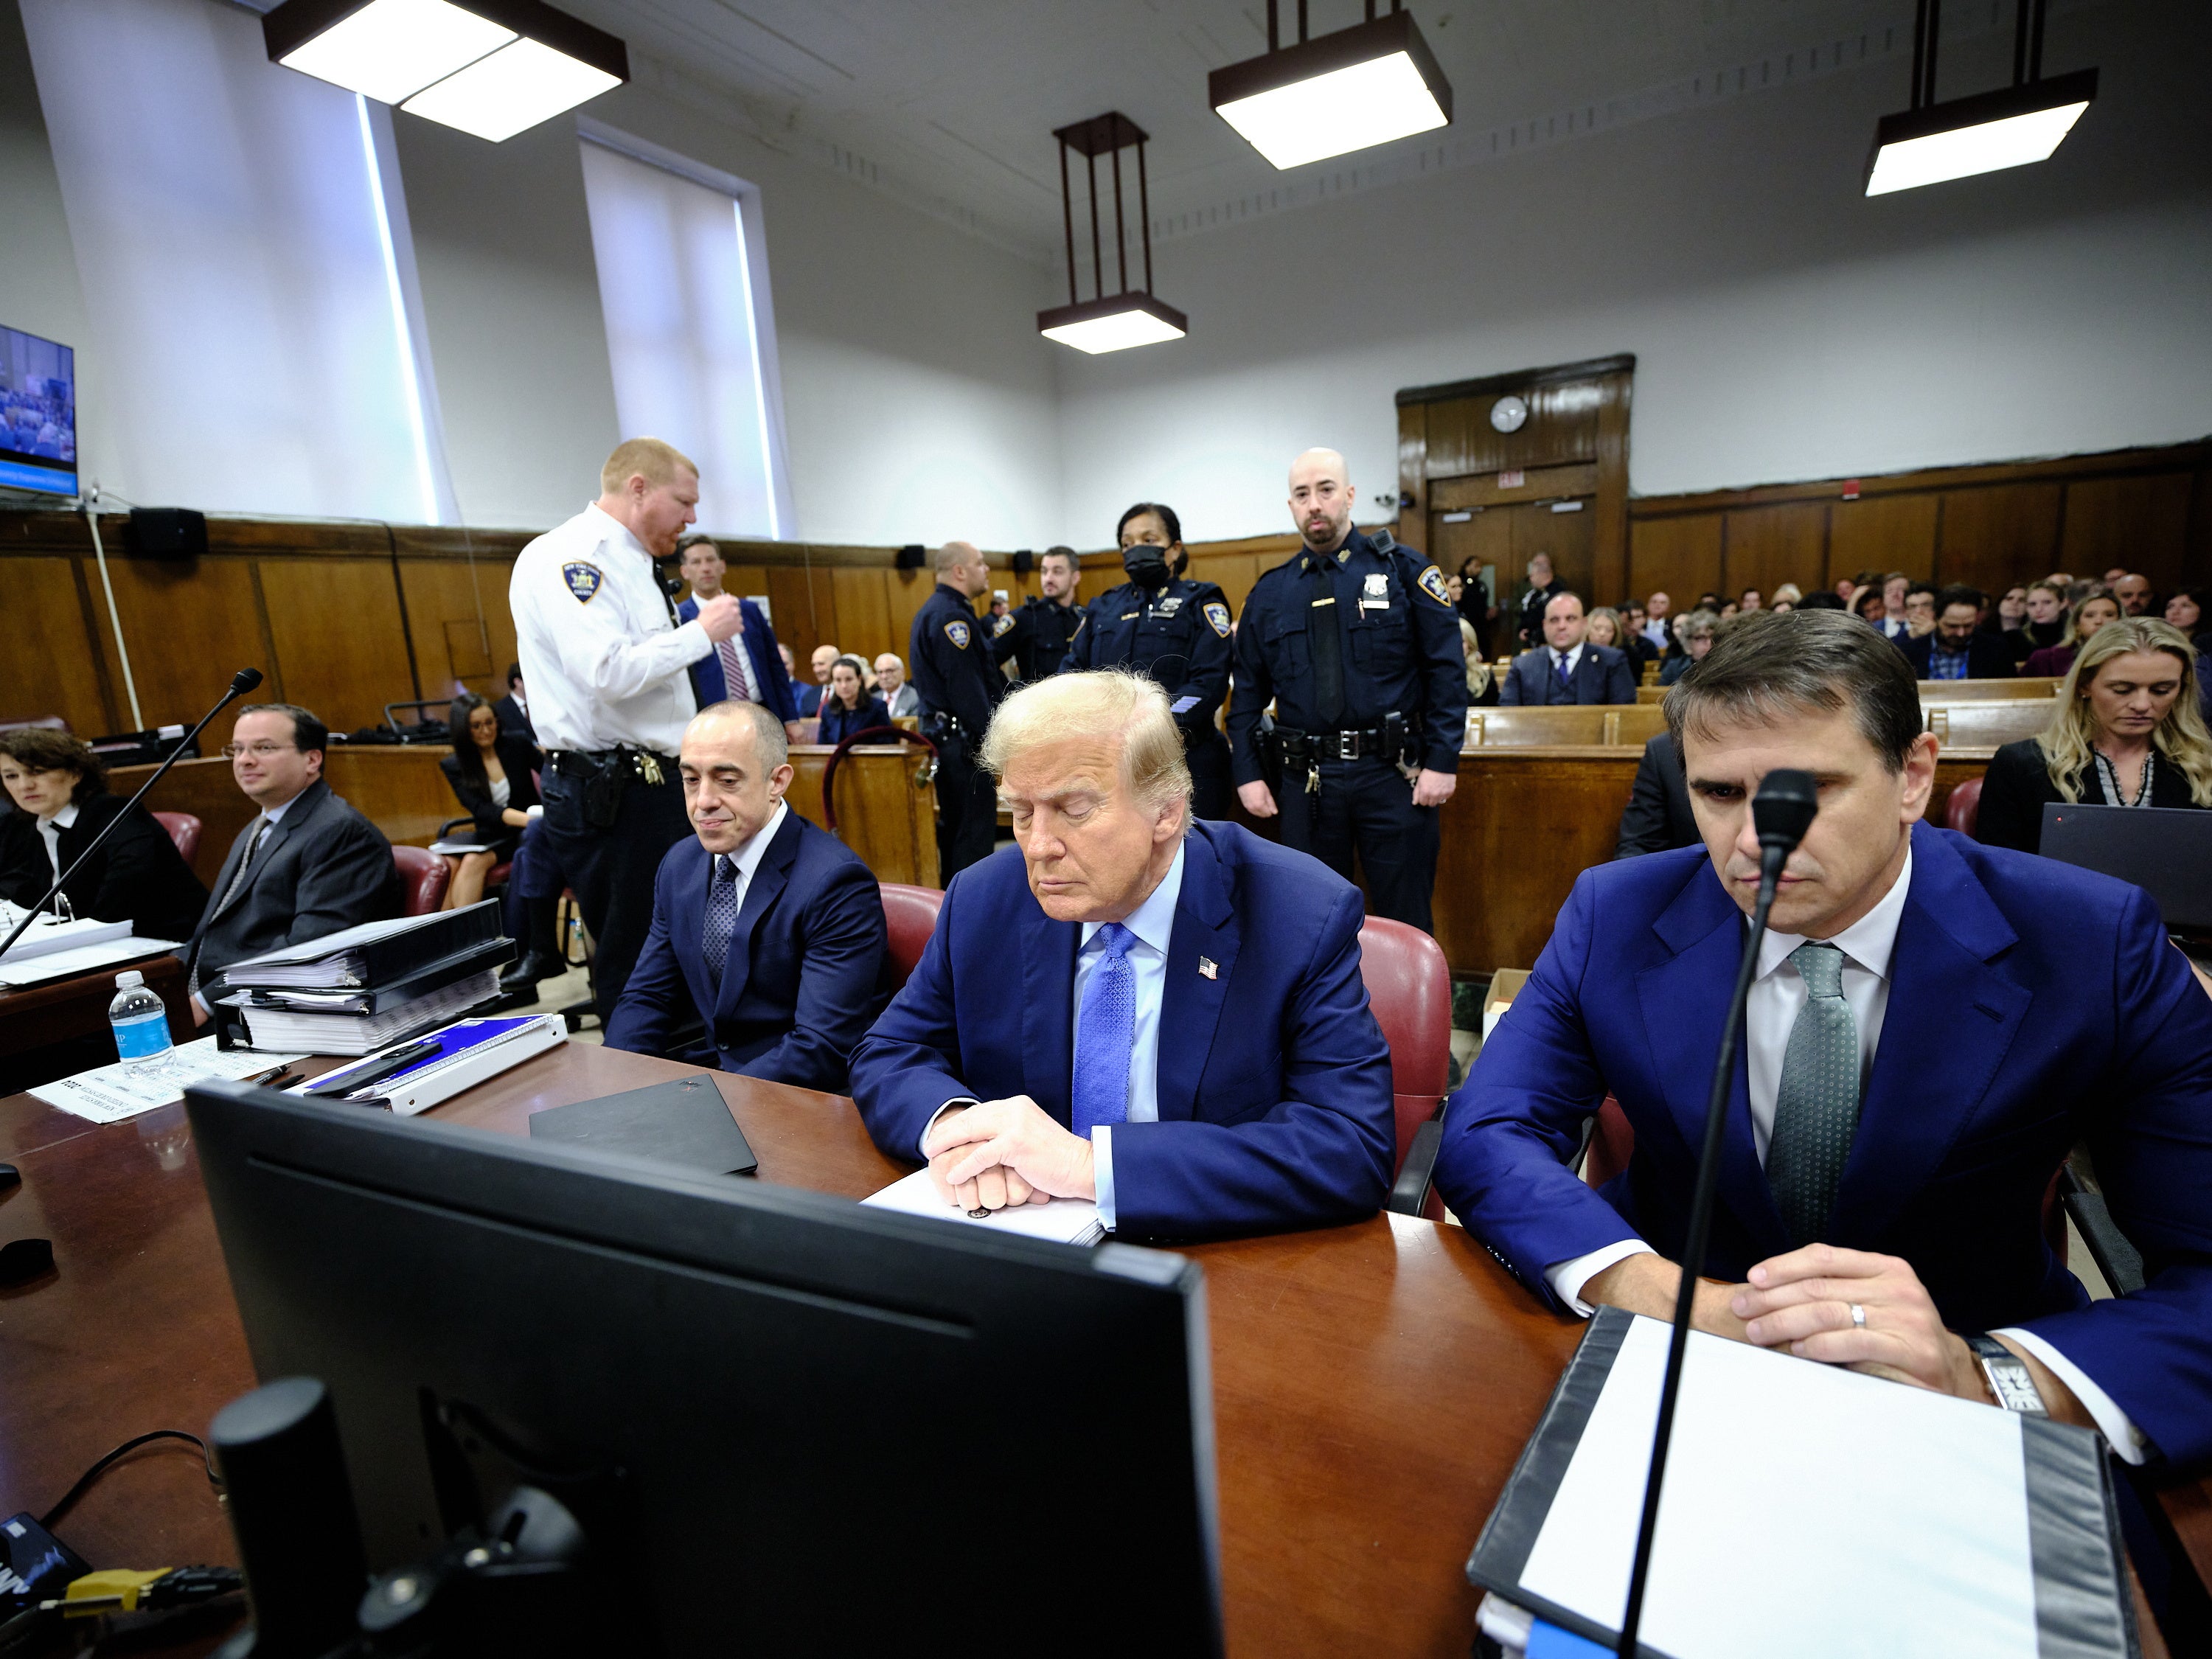 Trump often looks completely spent by the end of a day in court